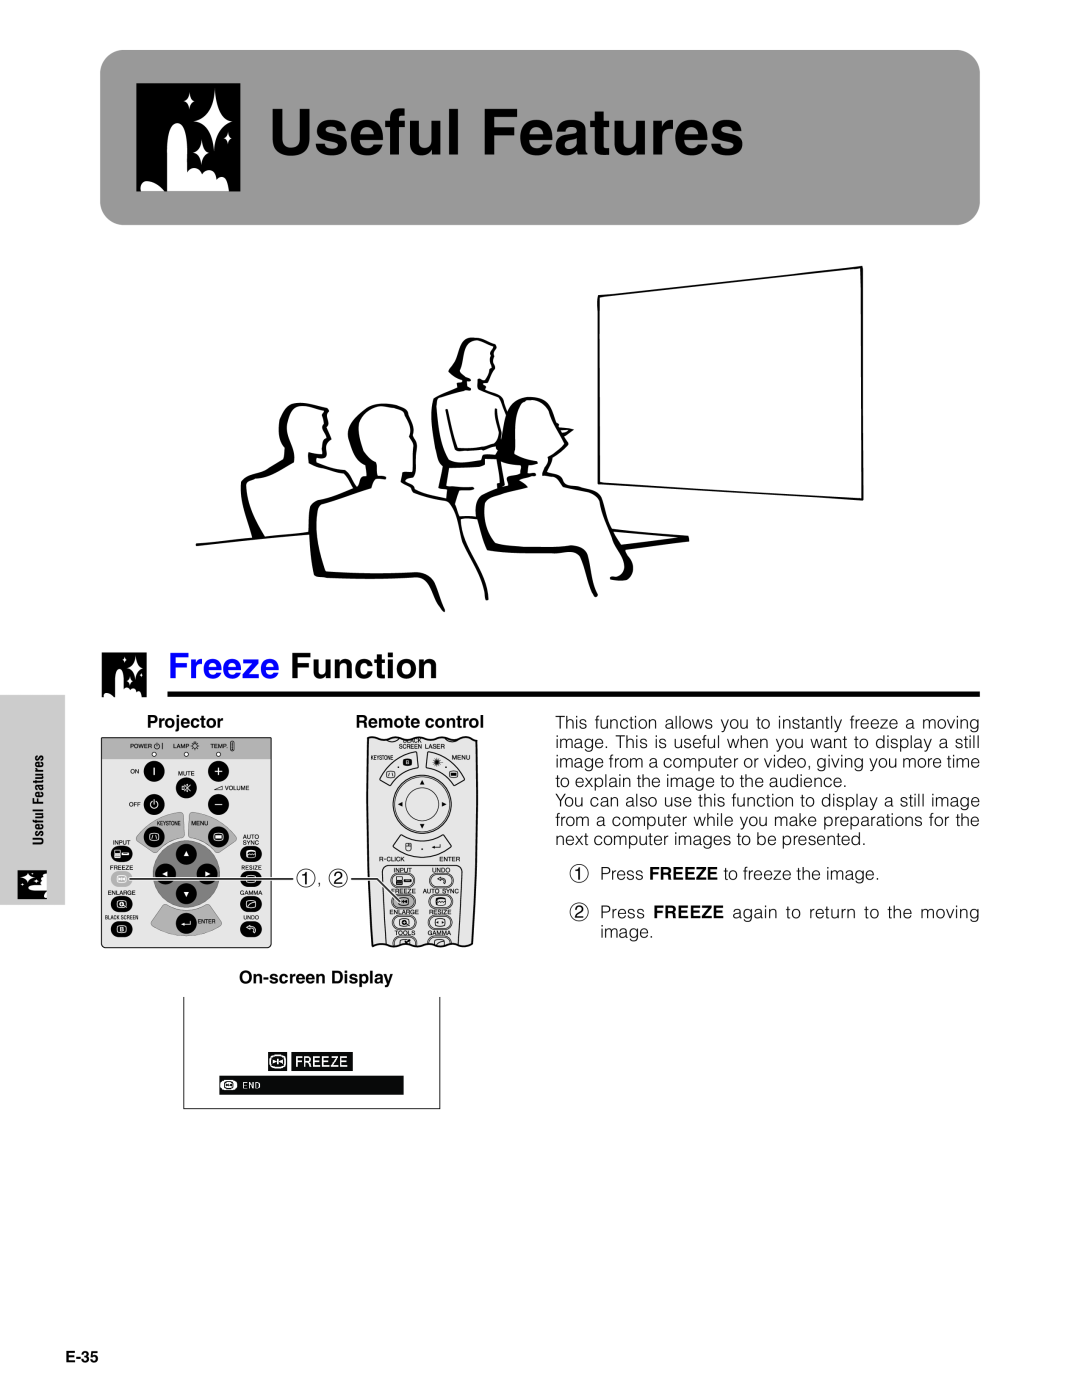 Sharp XG-C40XU operation manual Useful Features, Freeze Function, Projector, Remote control, On-screen Display 